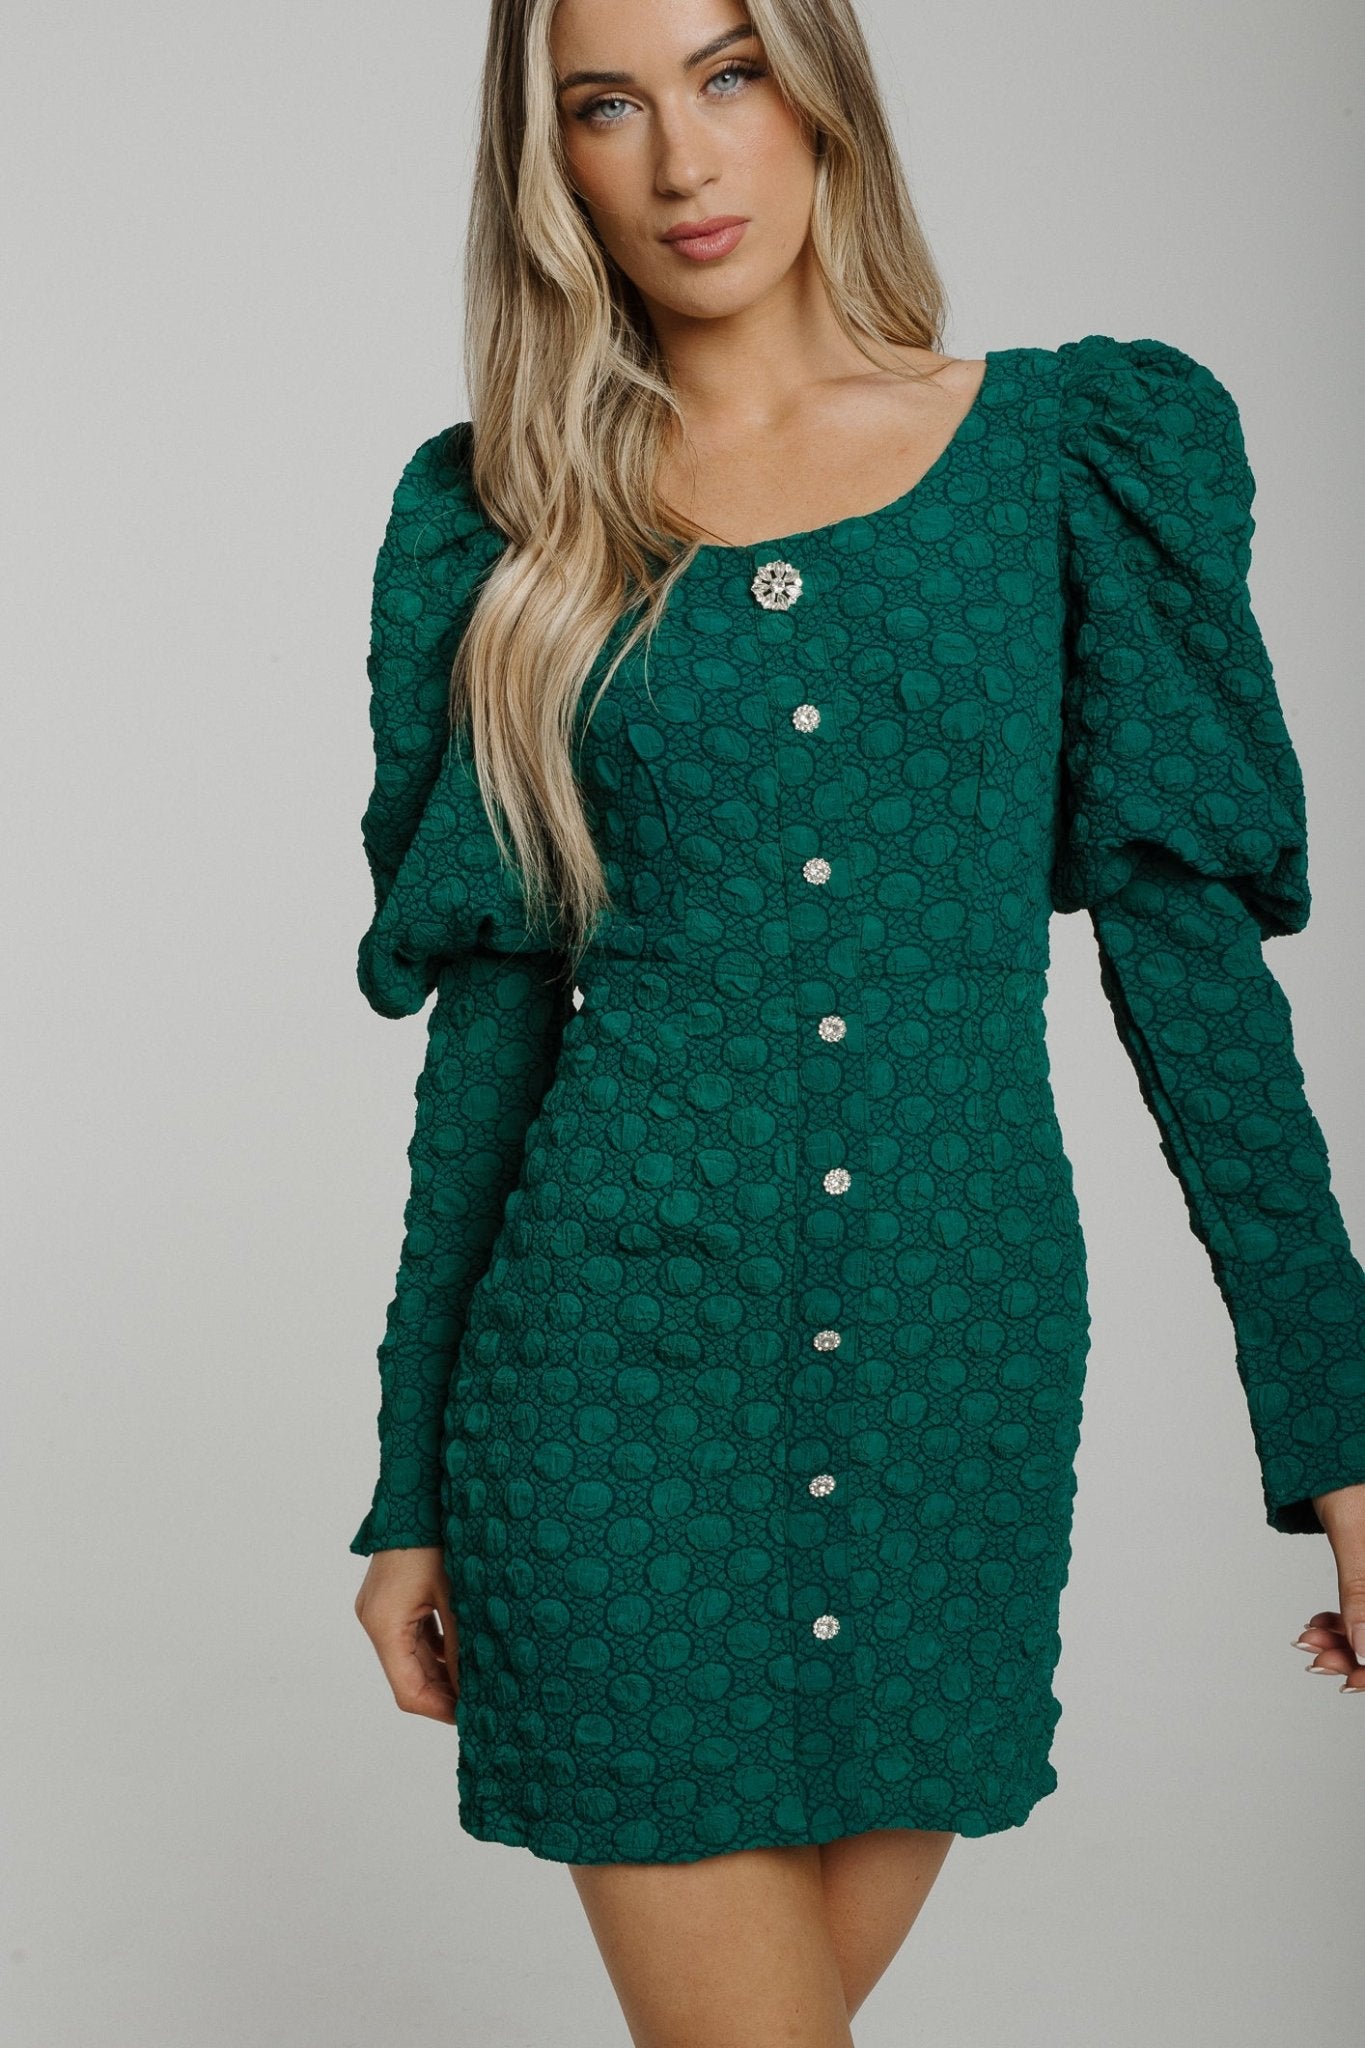 Paige Textured Puff Sleeve Dress In Green - The Walk in Wardrobe